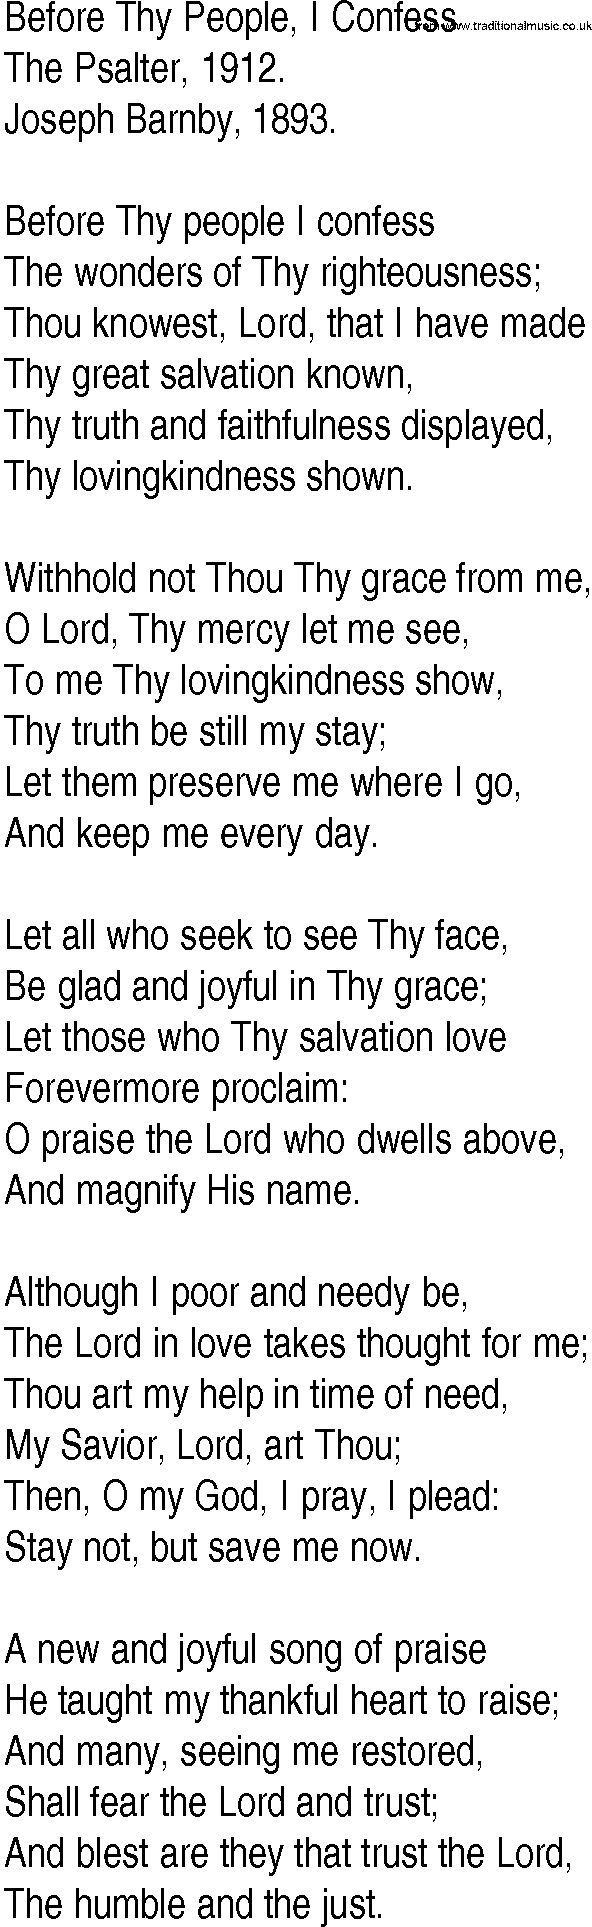 Hymn and Gospel Song: Before Thy People, I Confess by The Psalter lyrics